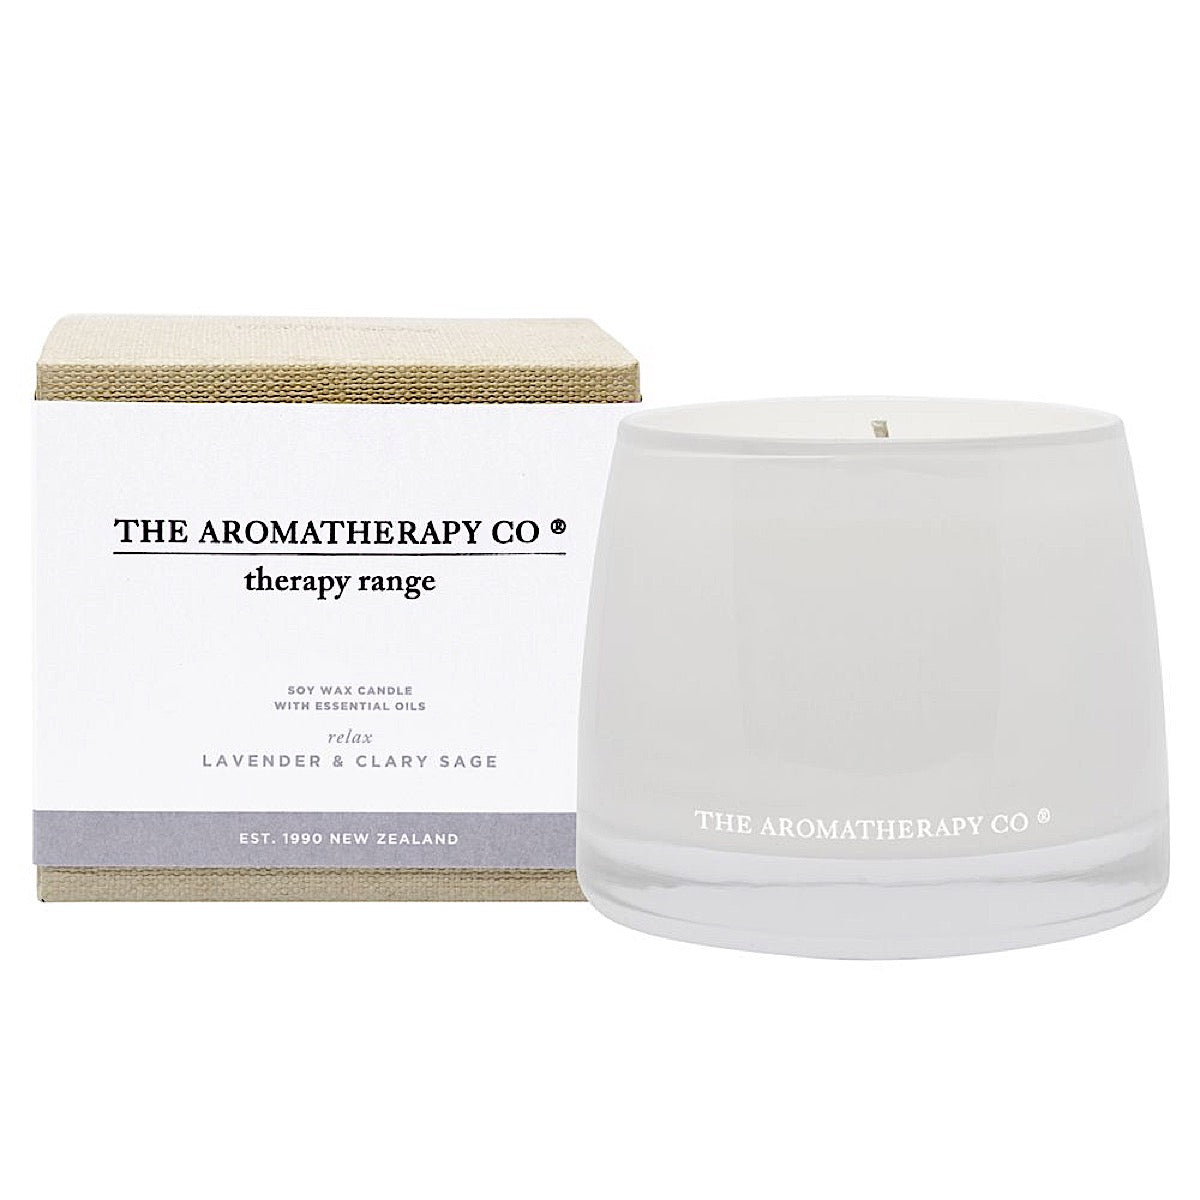 The Aromatherapy Co The Aromatherapy Co Therapy Range Relax Lavender & Clary Sage Candle at More Than Just A Gift